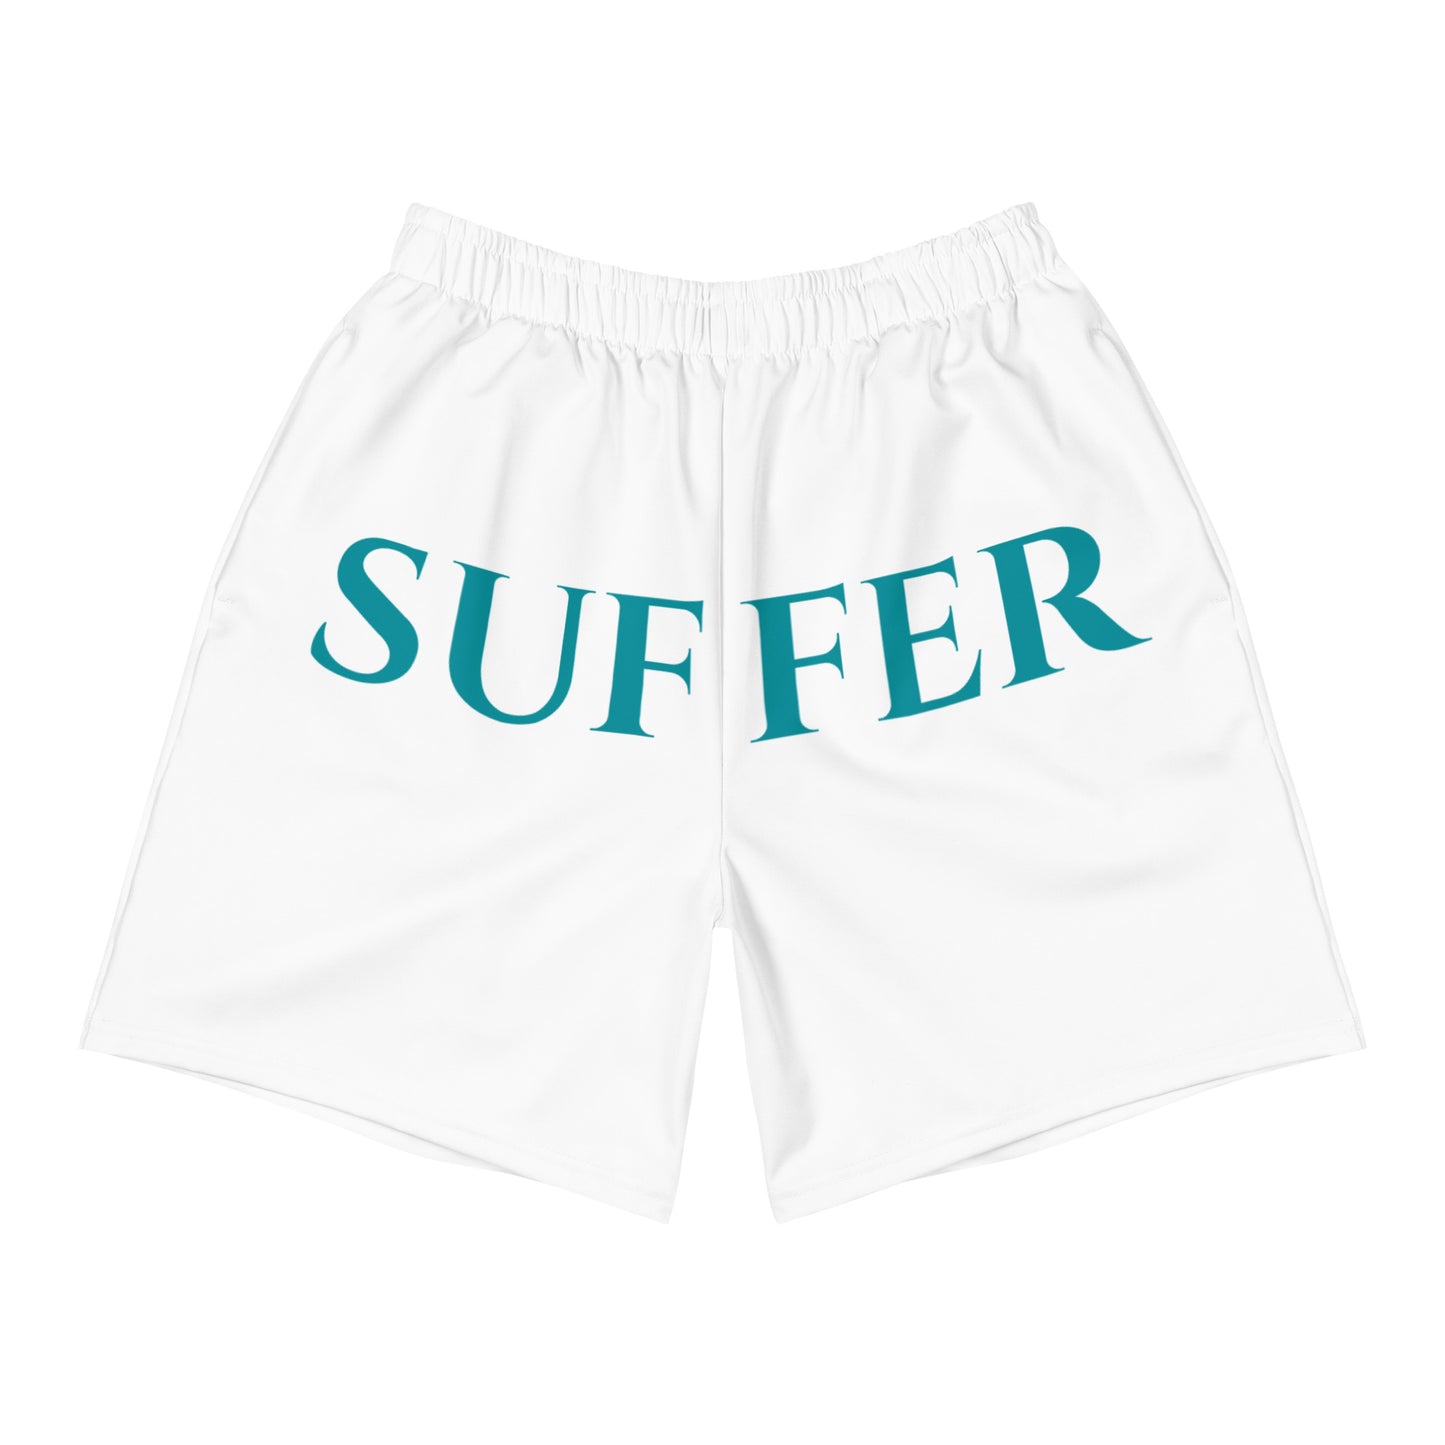 WhT/Teal Hip Suffer Athletic Shorts